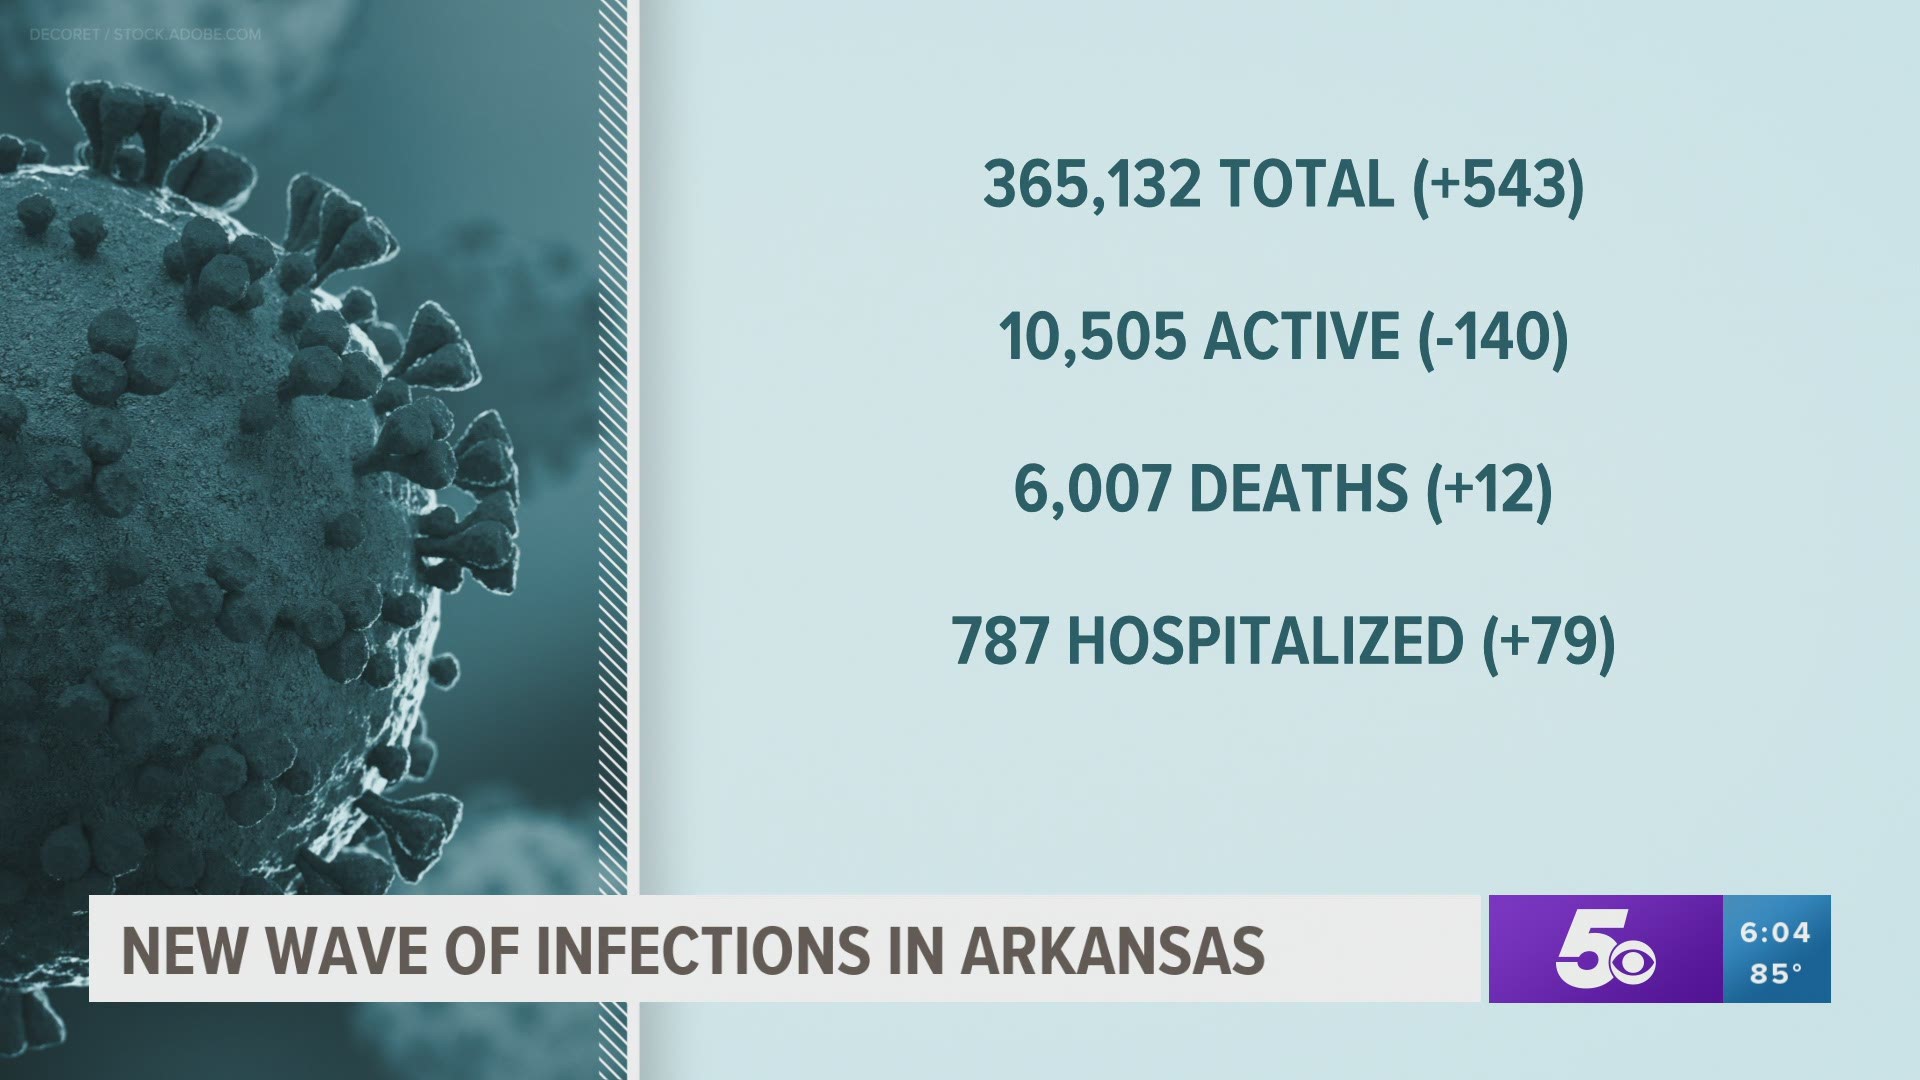 Deaths from COVID-19 have topped 6,000 in Arkansas since the pandemic began.